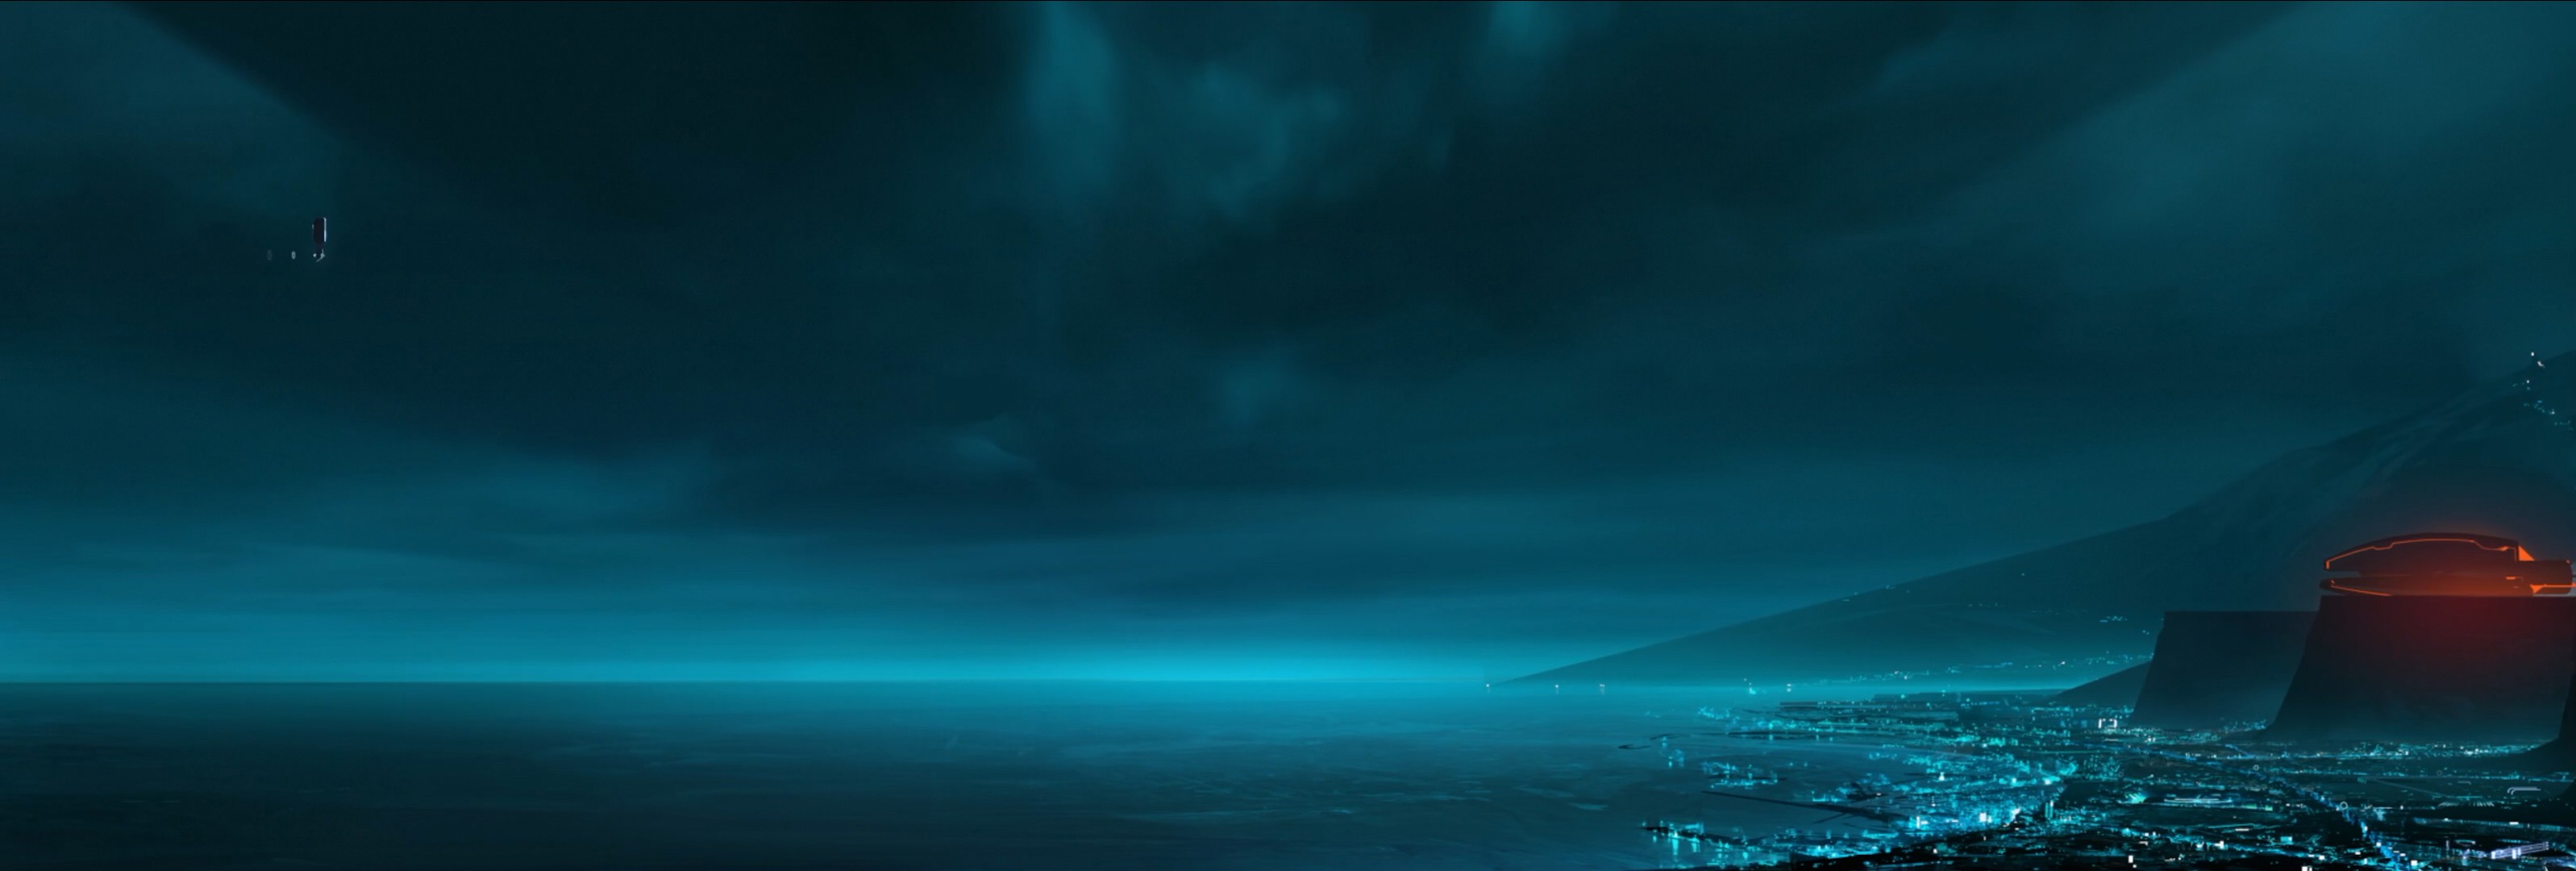 General 3195x1080 movies Tron: Legacy clouds water sky